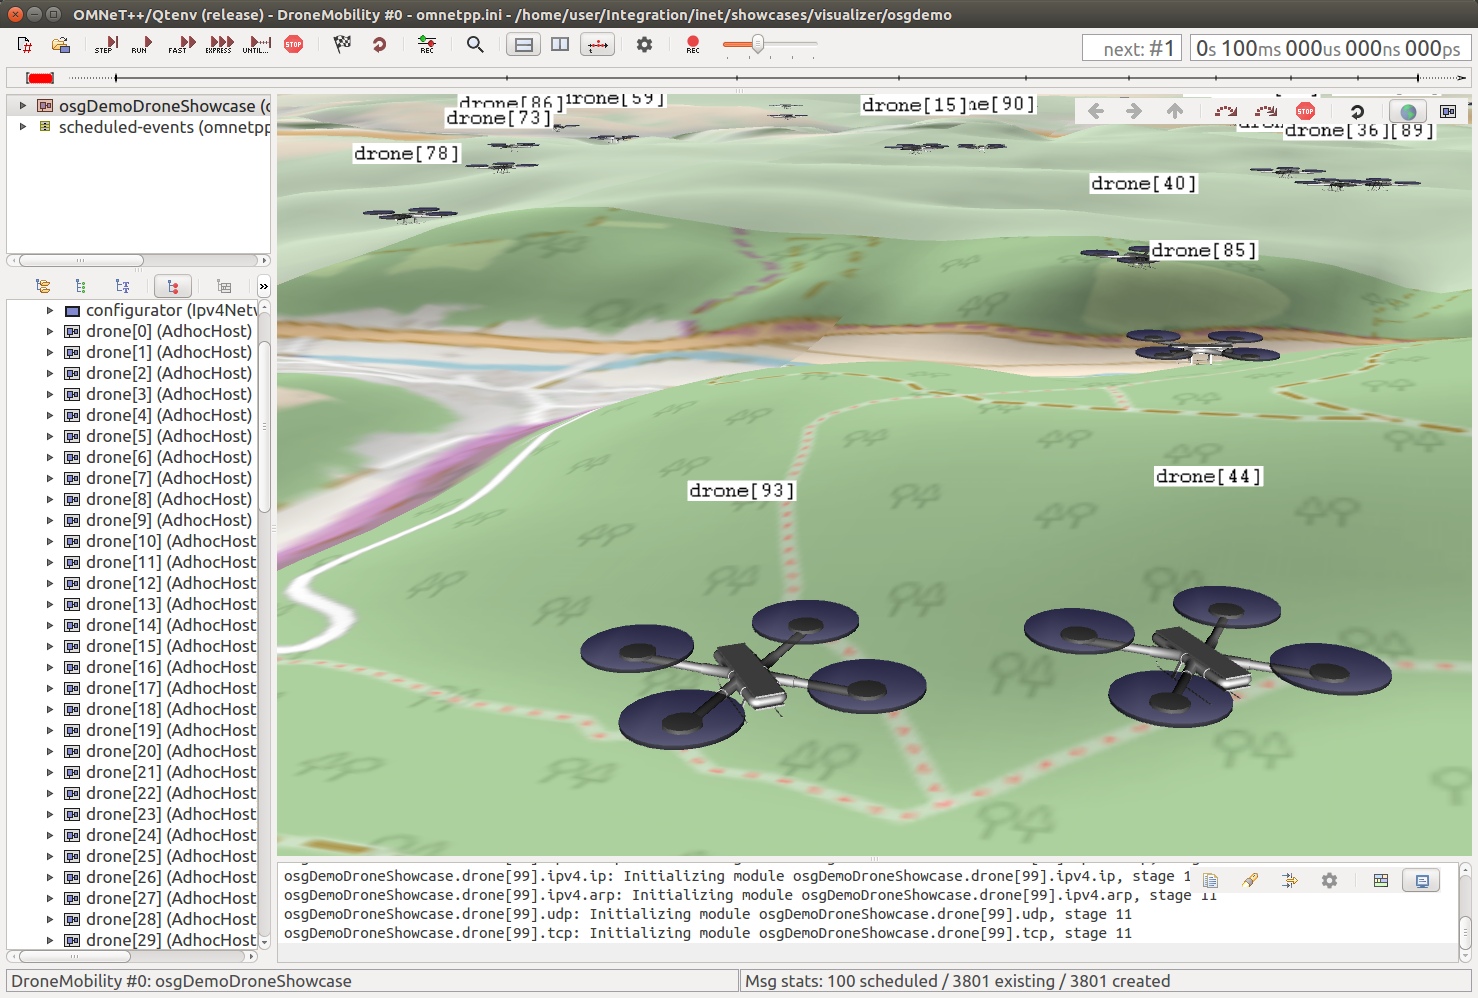 Qtenv - 3D visualization of an ad hoc network of drones using osgEarth